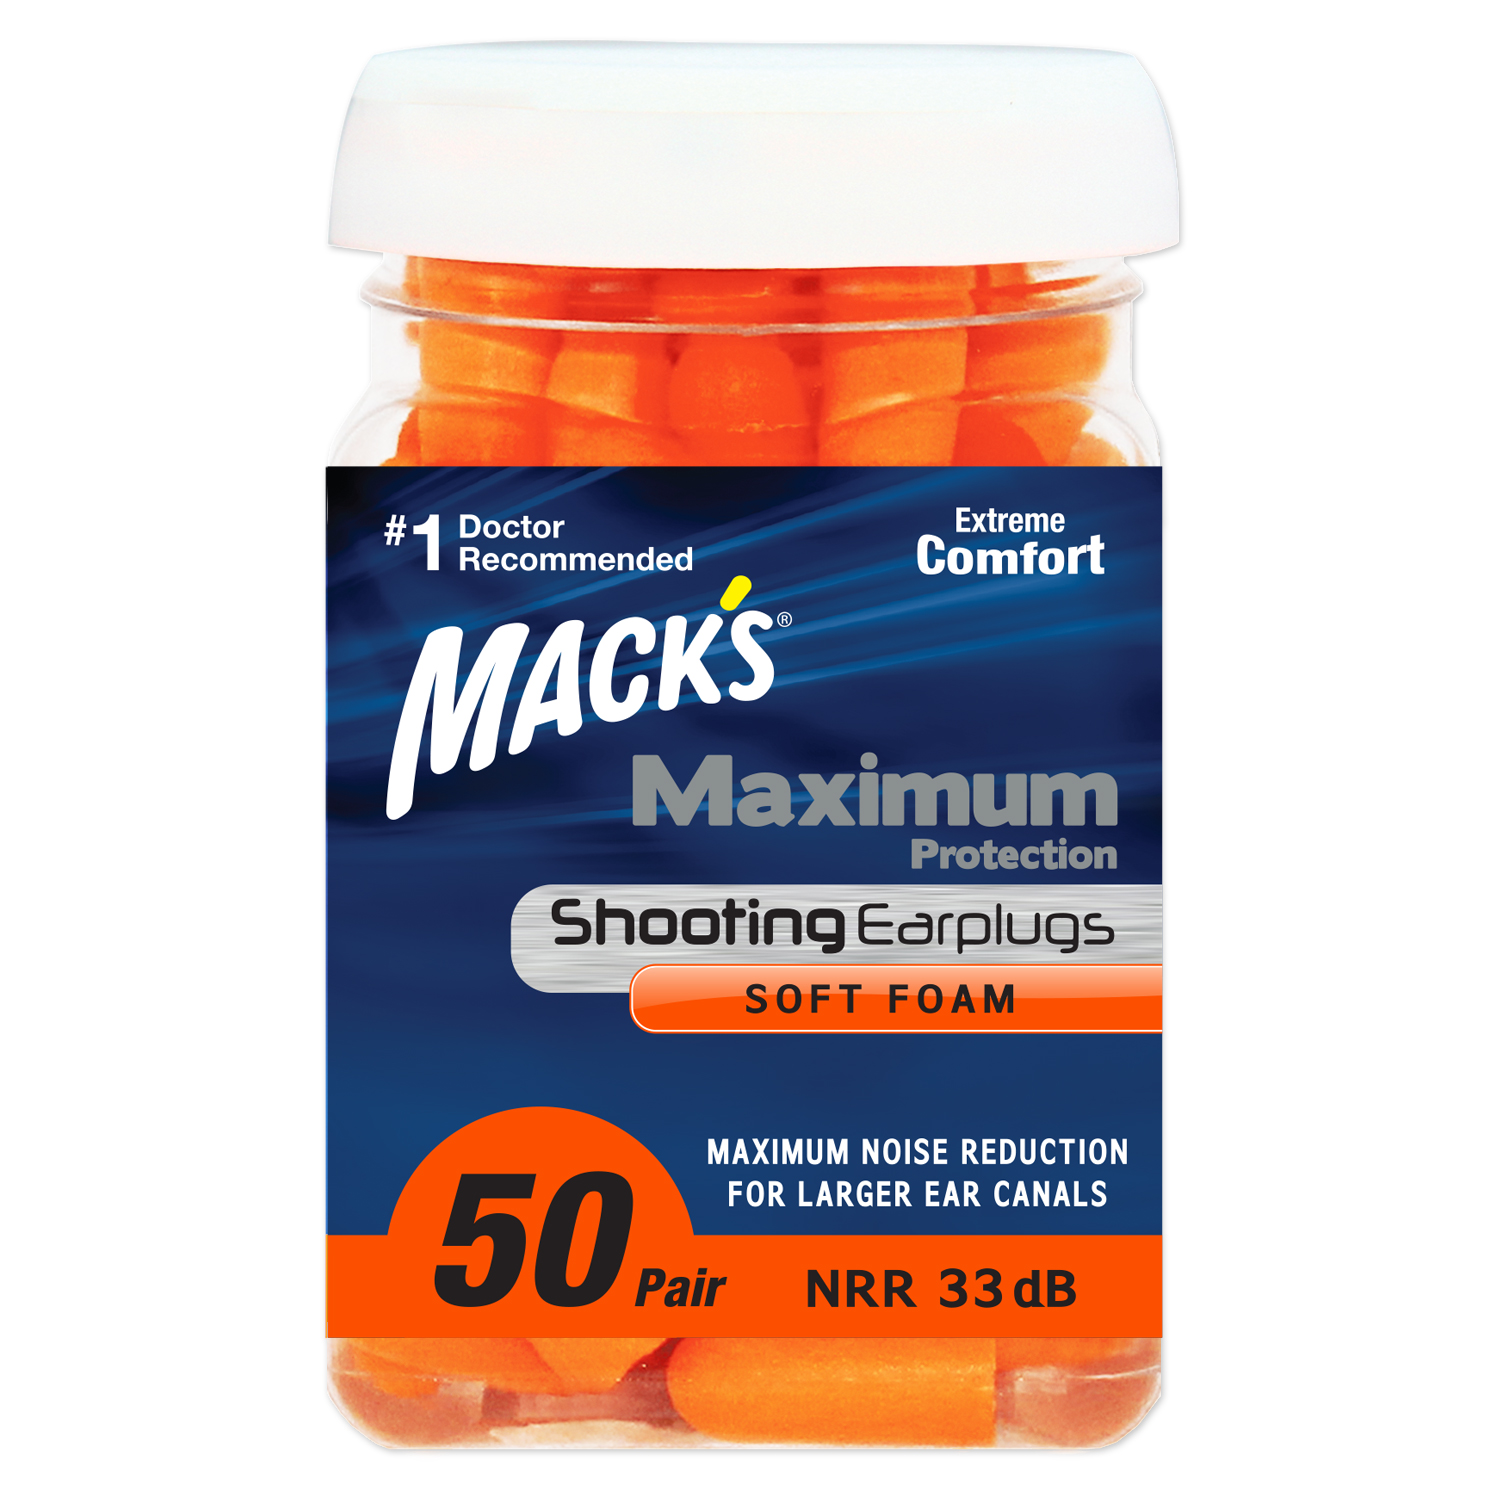 Shooting Maximum Protection Soft Foam Ear Plugs for noise cancelling and noise reduction